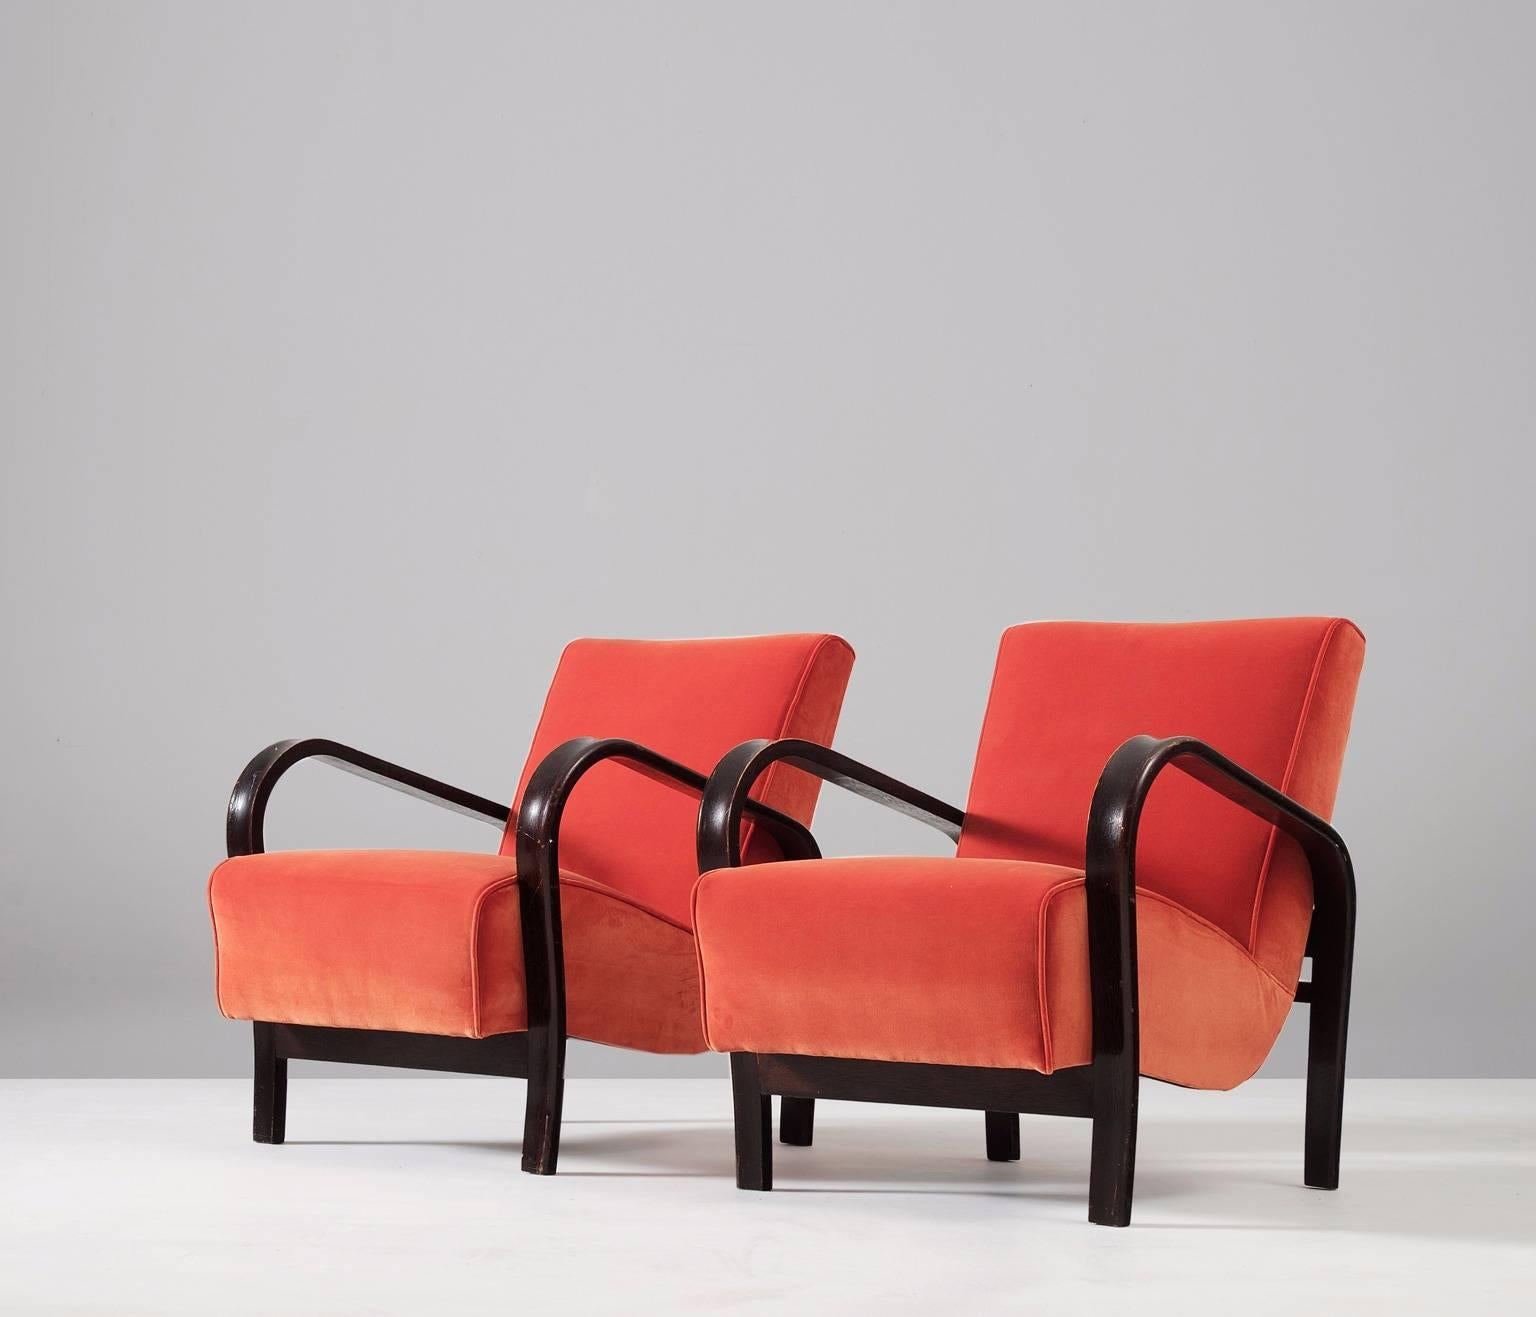 A pair of armchairs, in wood and fabric, by Jindrich Halabala, Czech Republic 1930s. 

Variant of the famous Halabala lounge chair. These armchairs have an elegant curved frame of bended wood. The seating is very comfortable due the springs. The